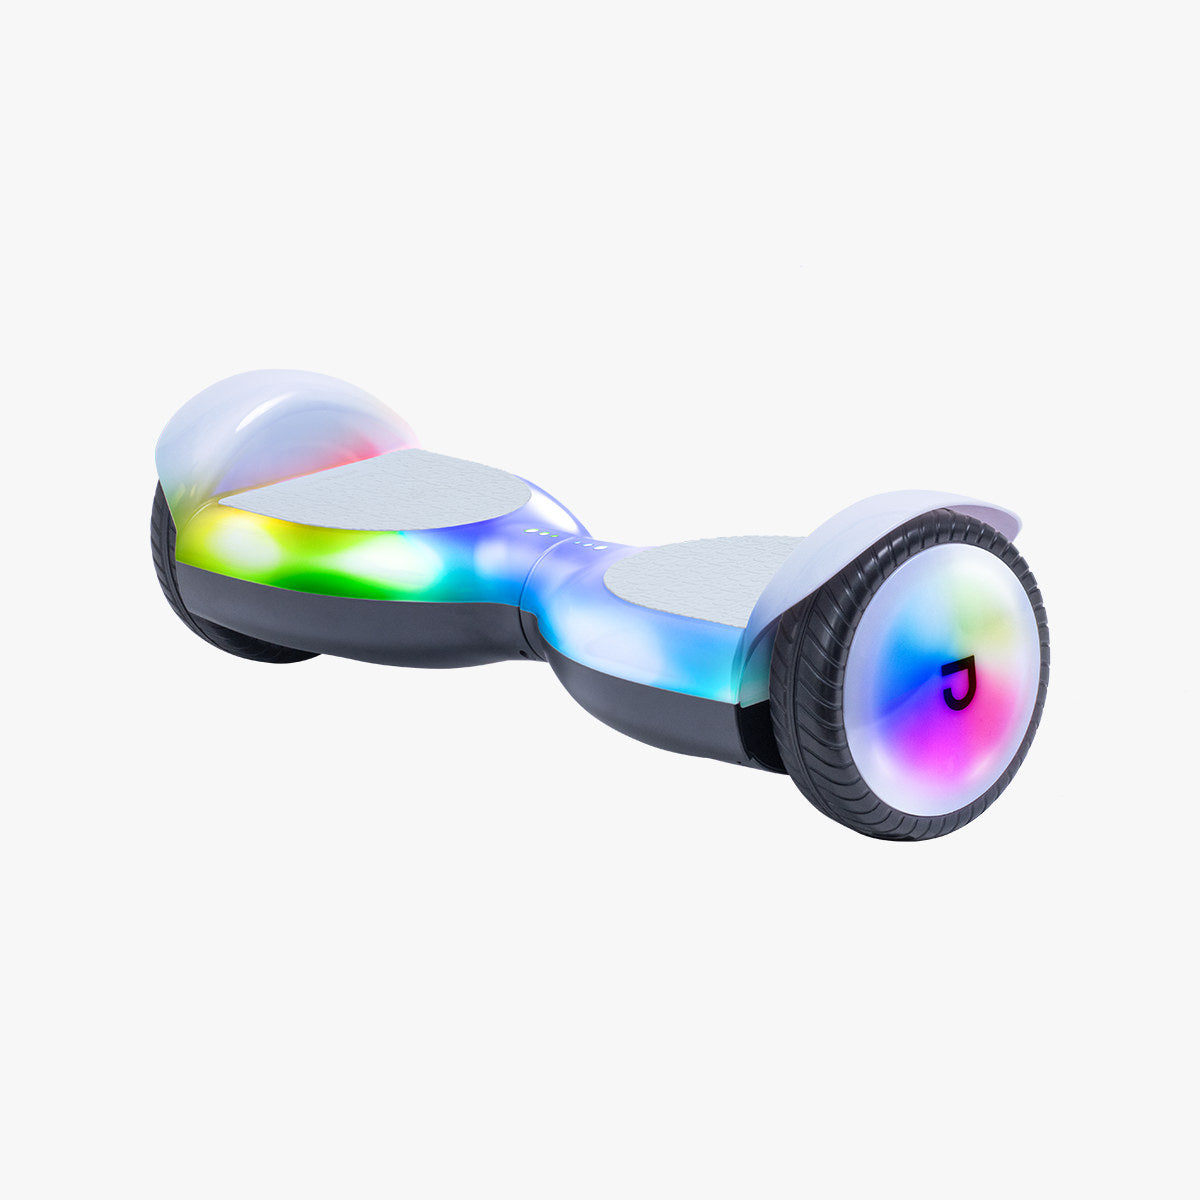 another front view of the Plasms X hoverboard angled to the left